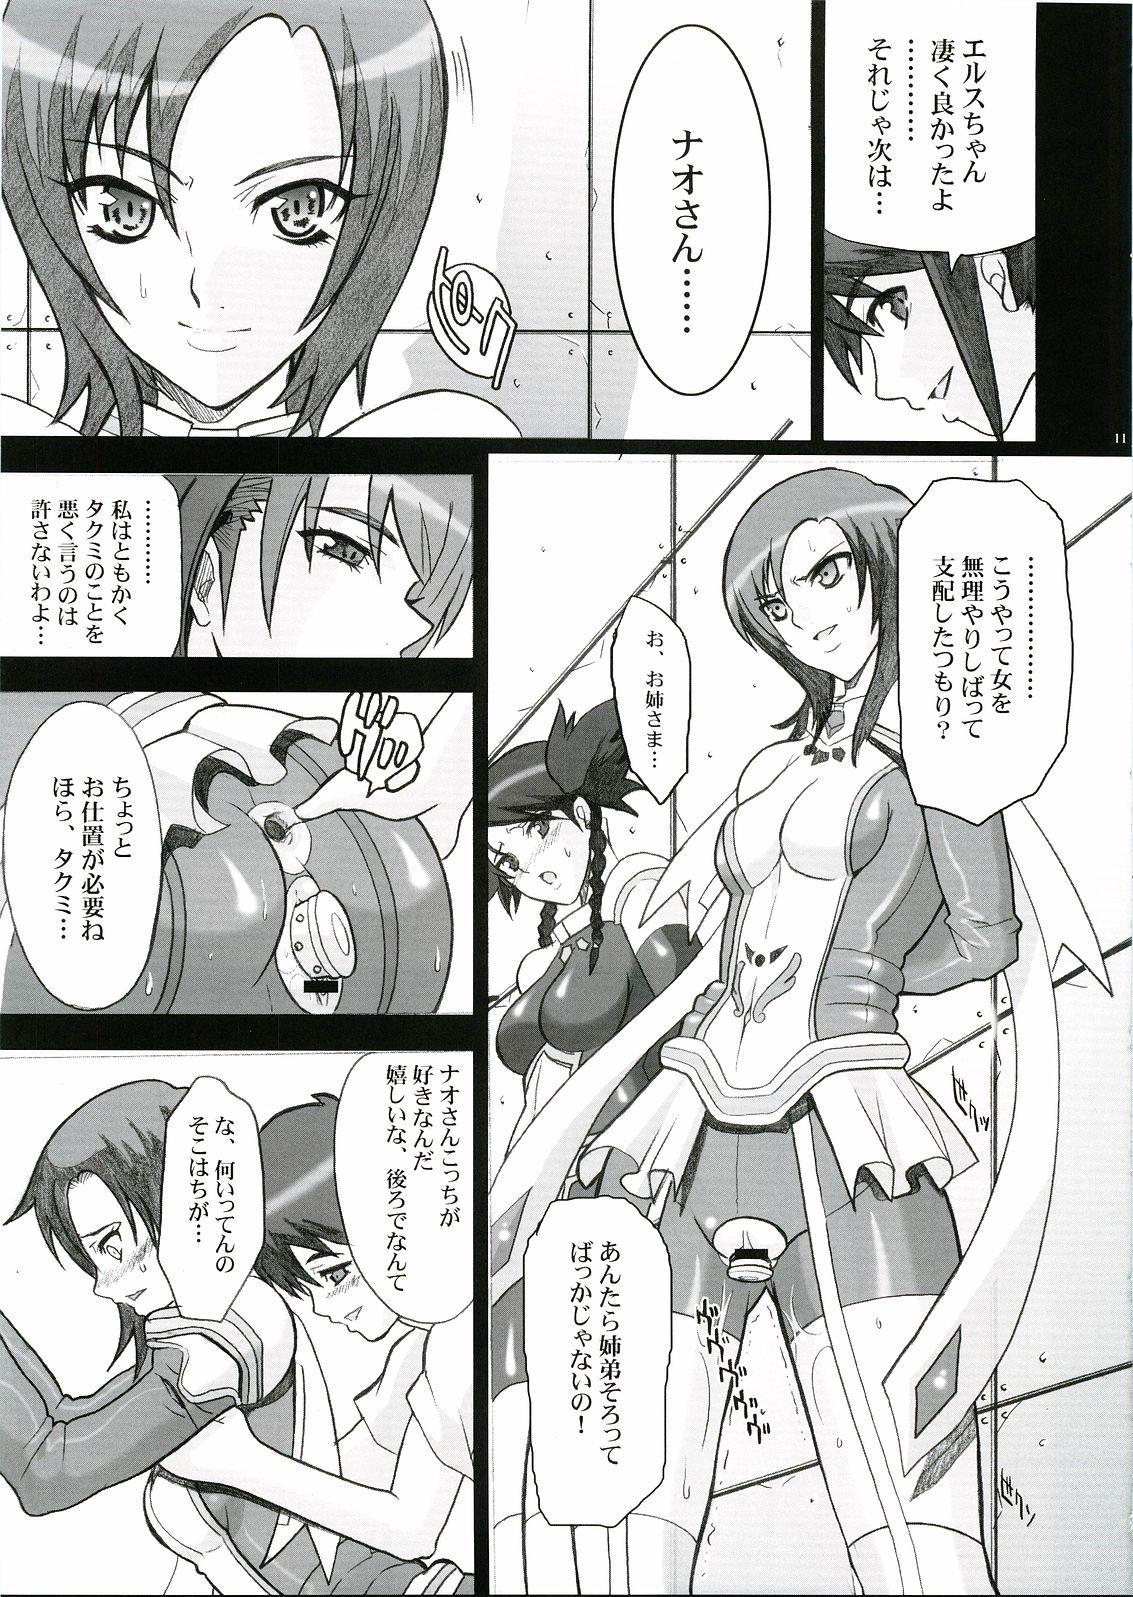 Ameteur Porn IMPERIAL DAYS - Mai otome French - Page 8